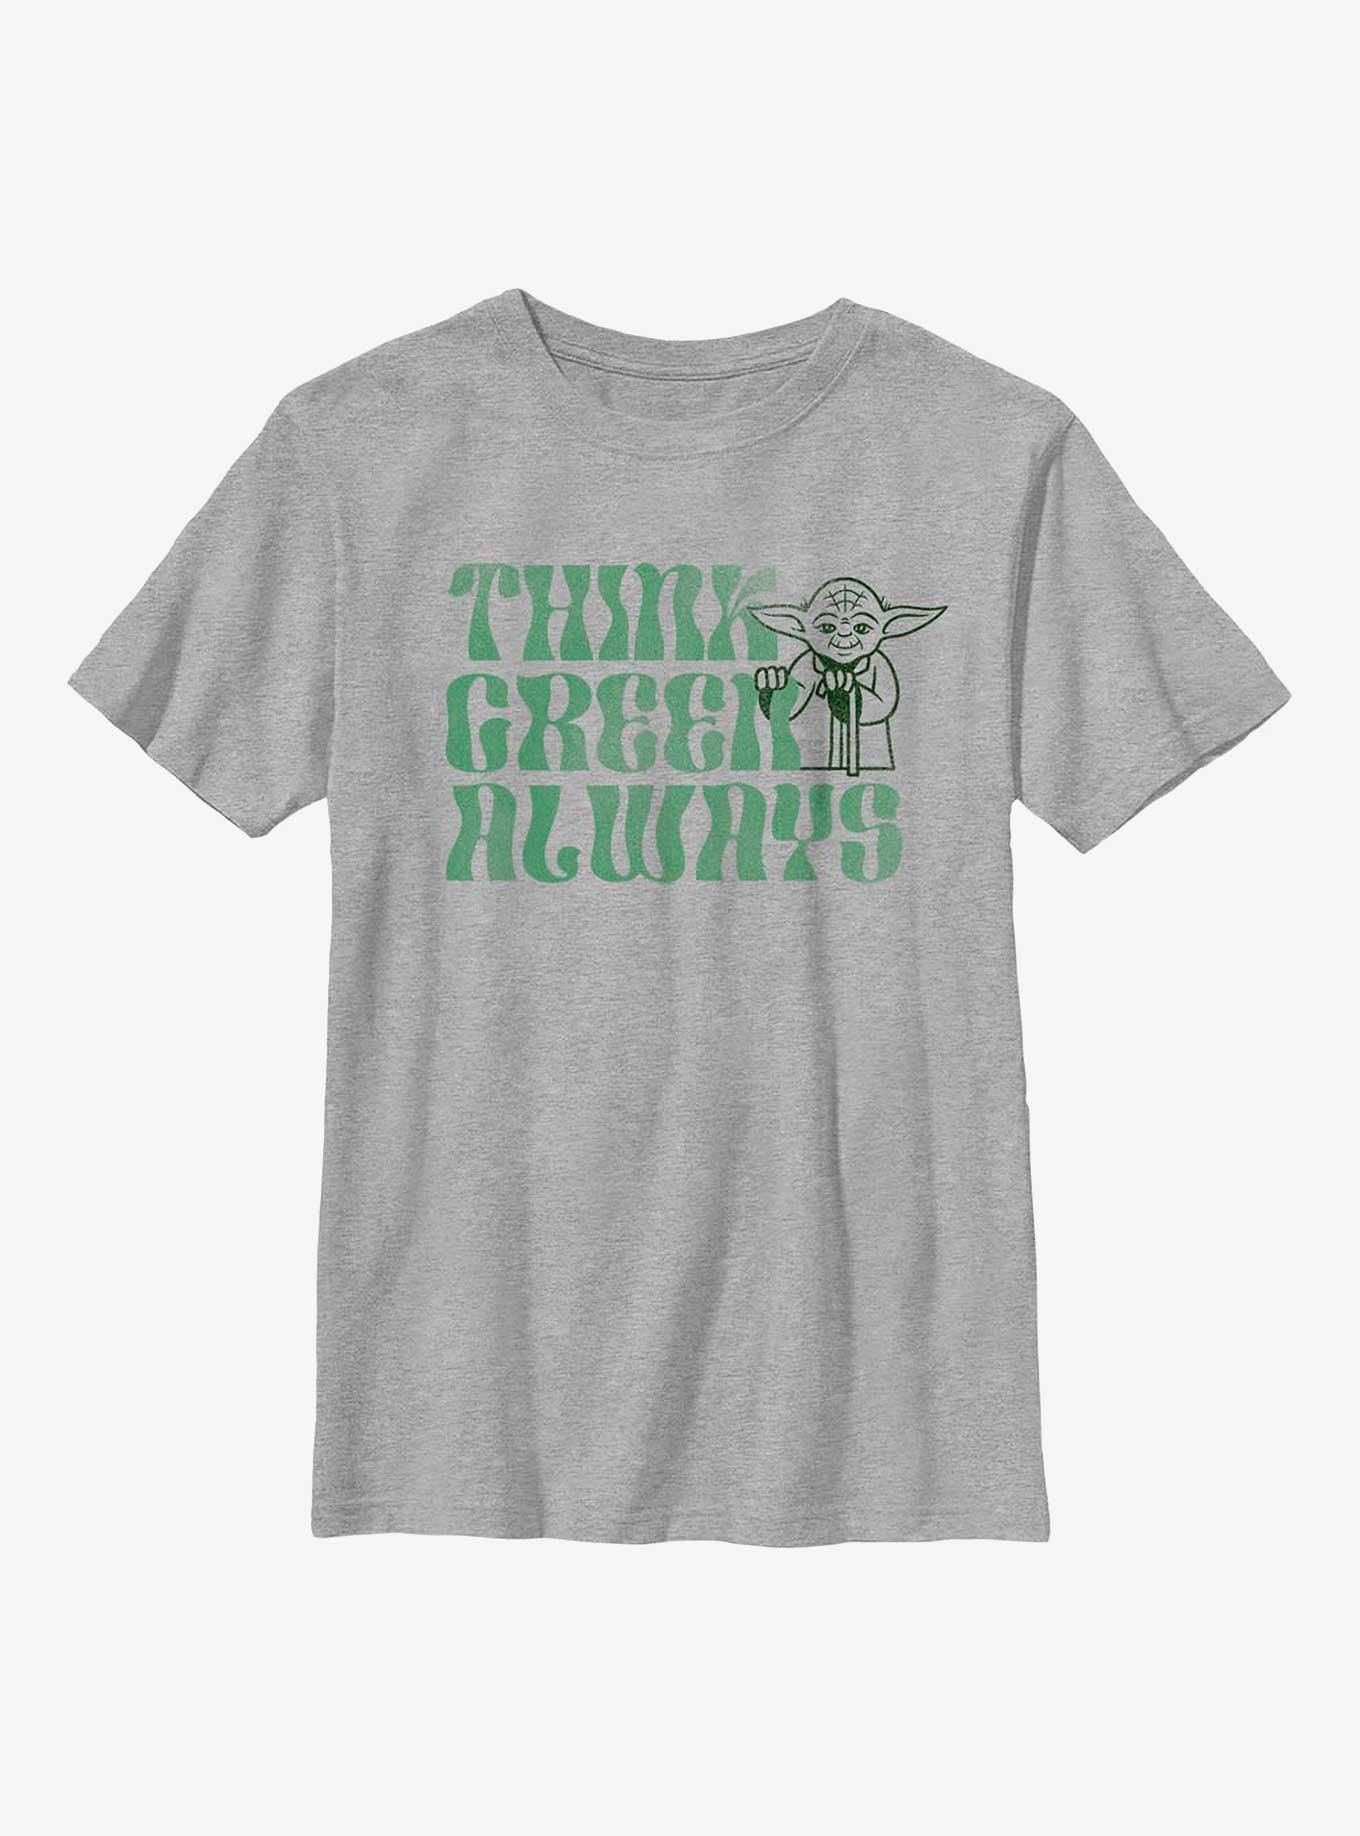 Star Wars Think Green Always Youth T-Shirt, , hi-res